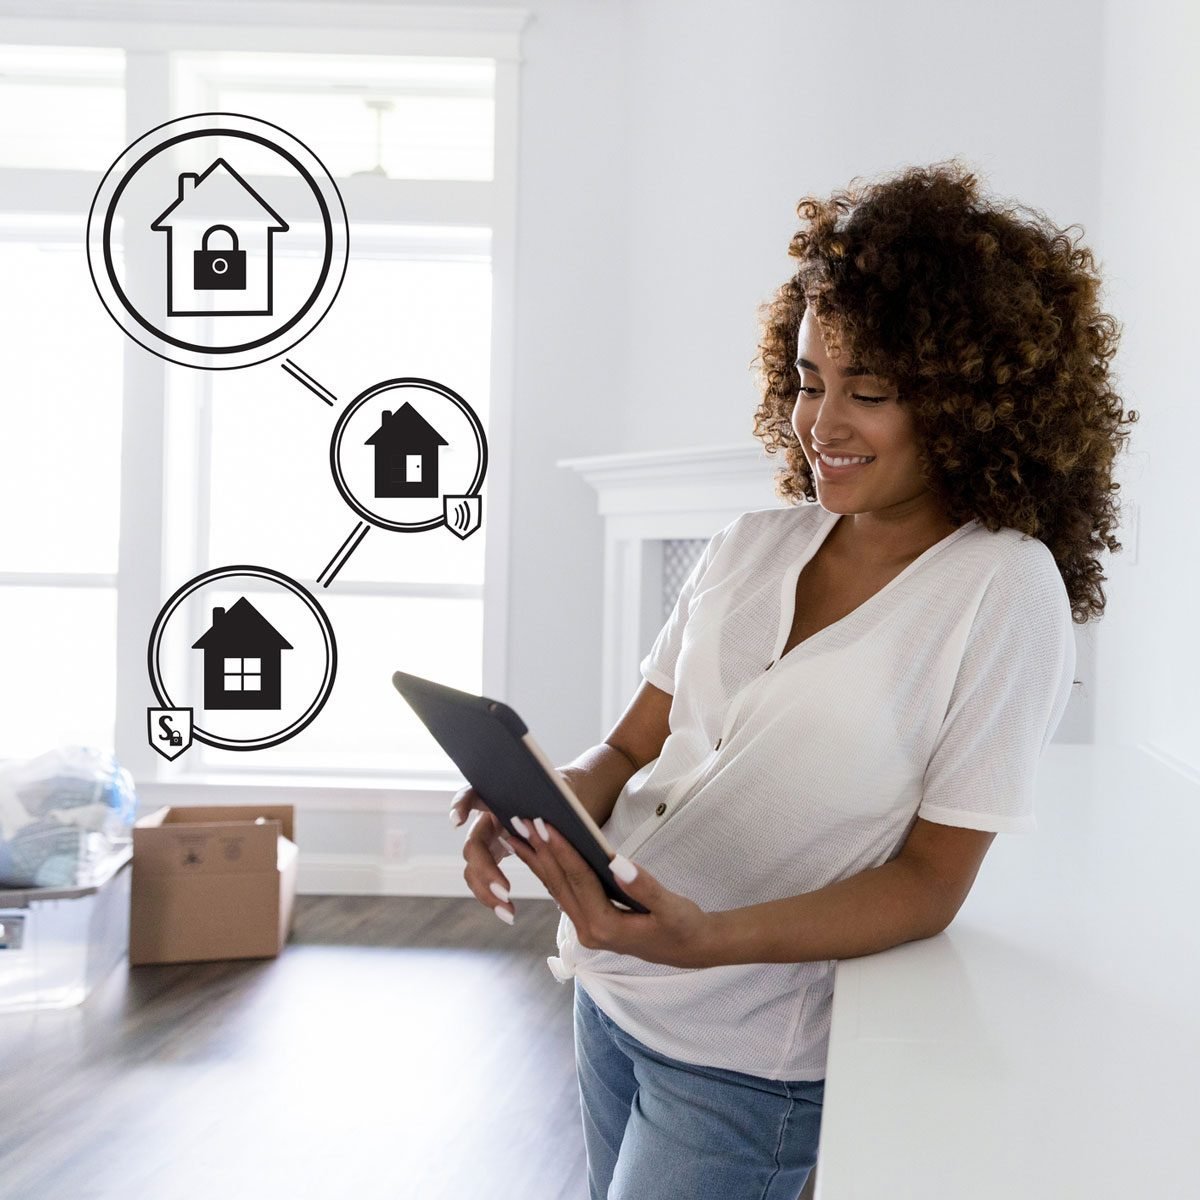 Beginner's Guide To Smart Home Security Systems